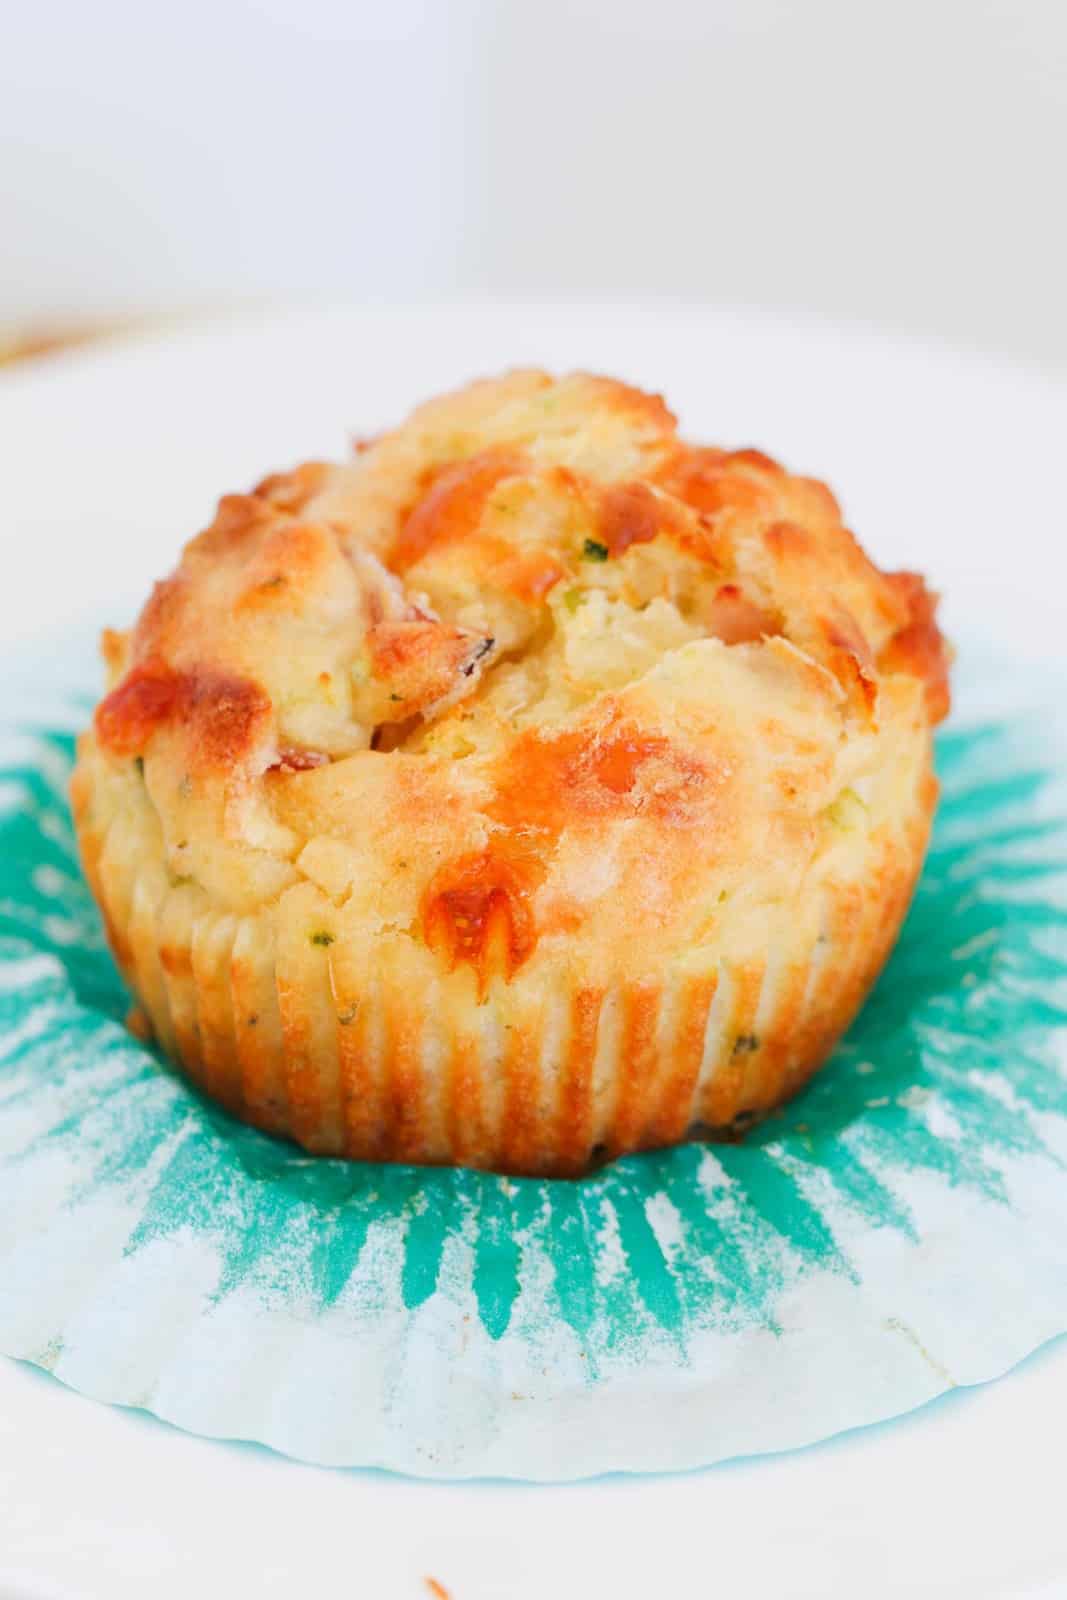 A savoury muffin being opened from a muffin case.